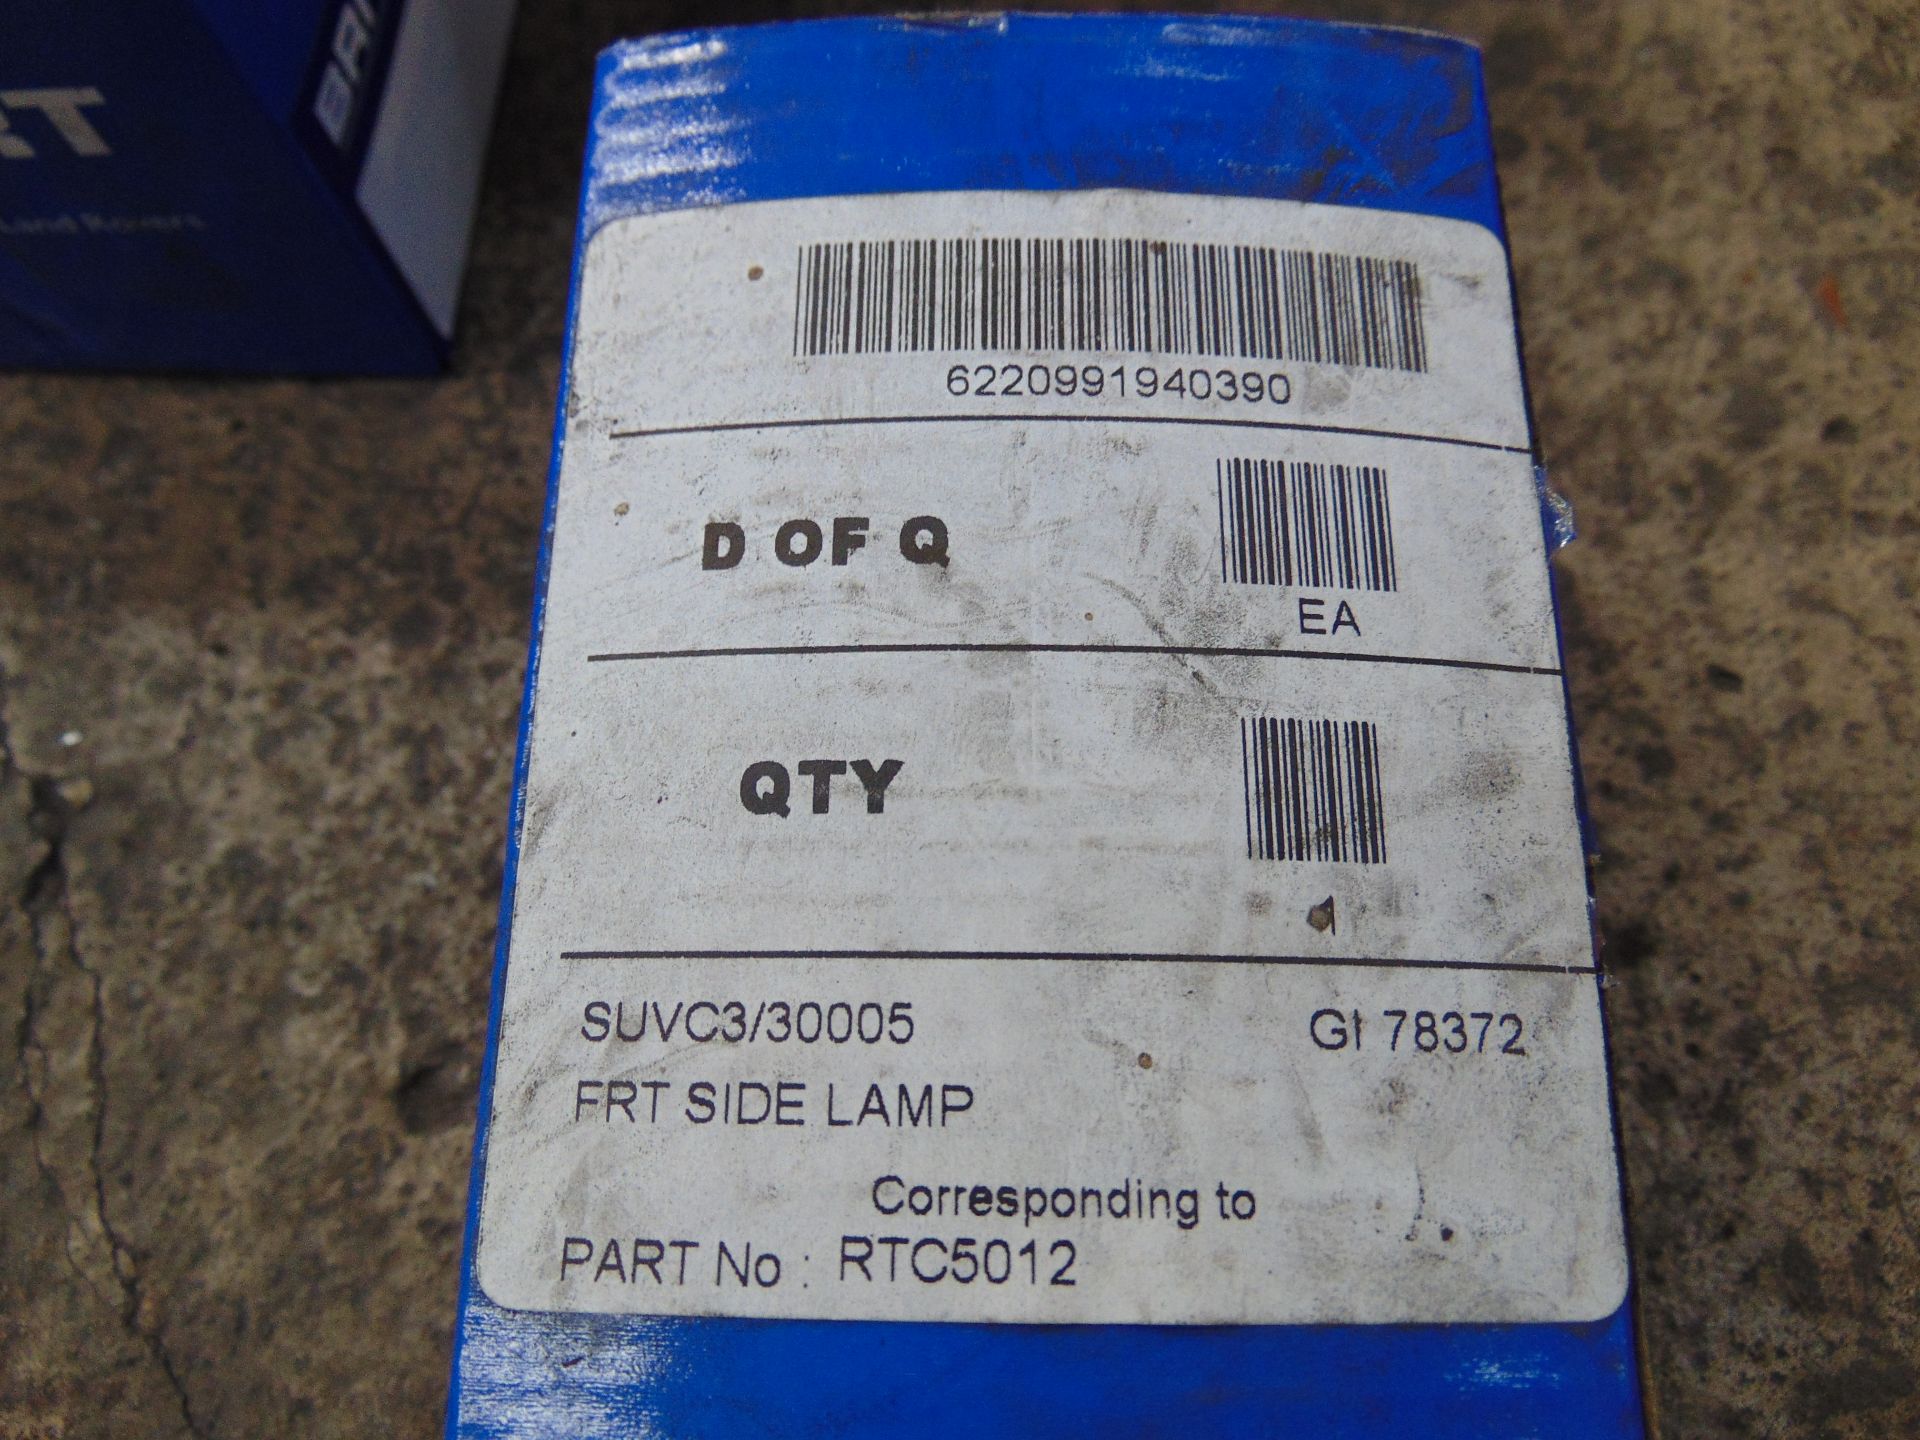 6 x Land Rover Side Lamps P/No RTC5012 - Image 4 of 4